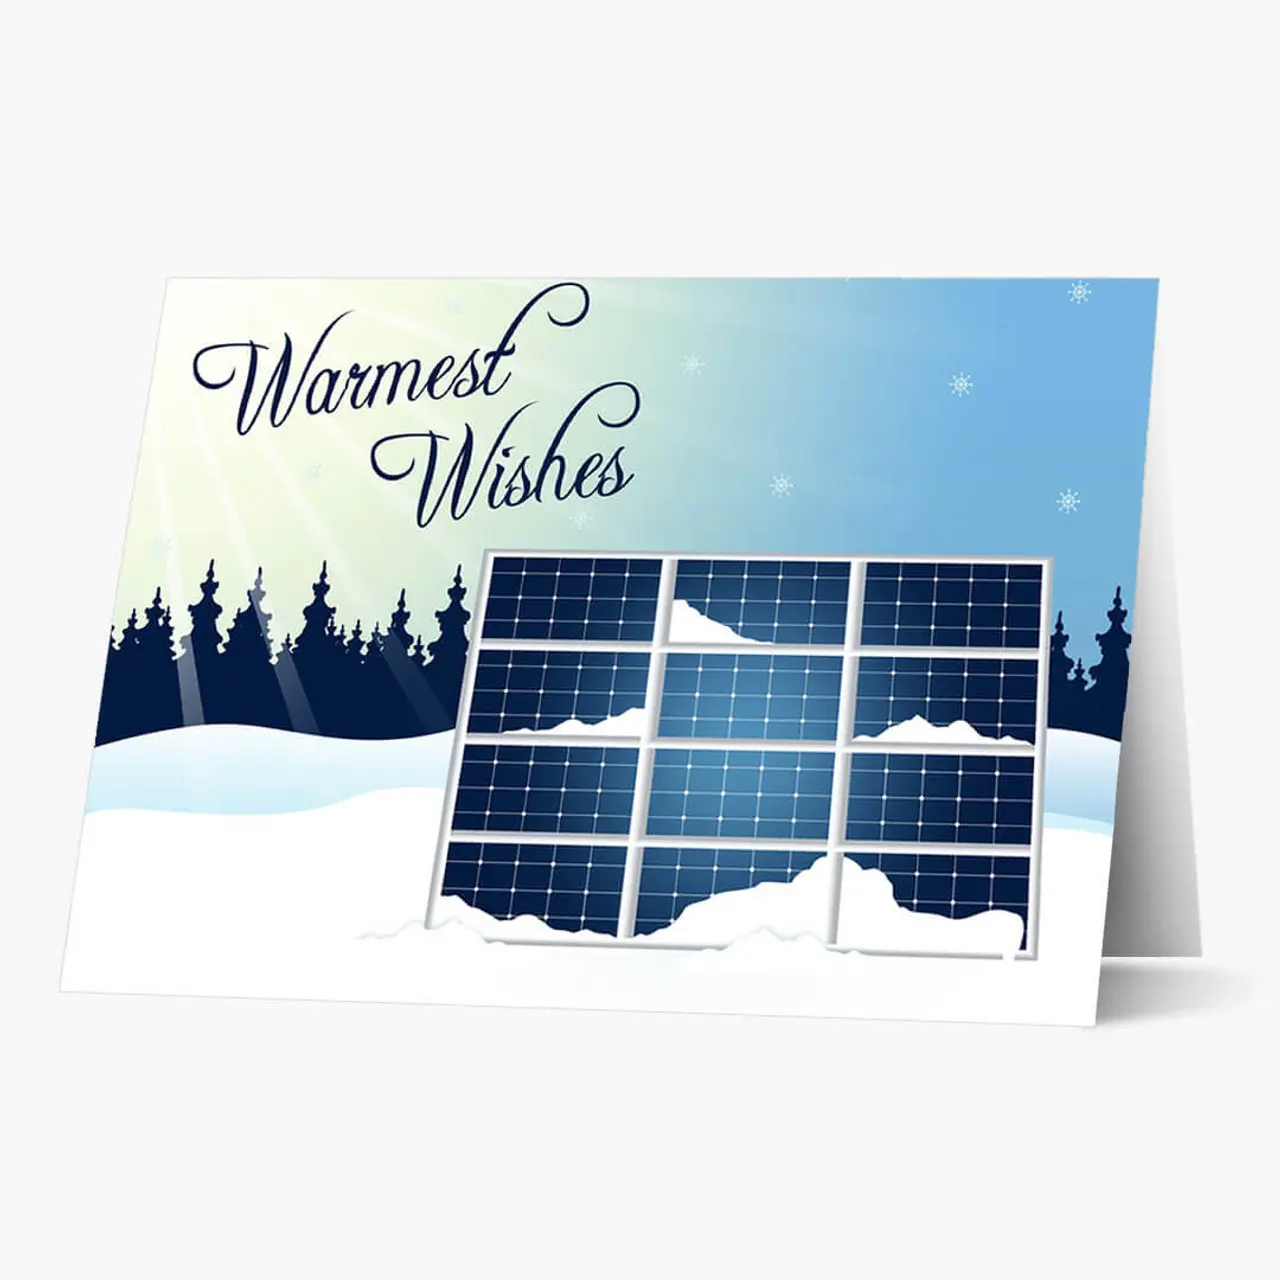 holiday solar panels - What is the holiday mode on solar panels